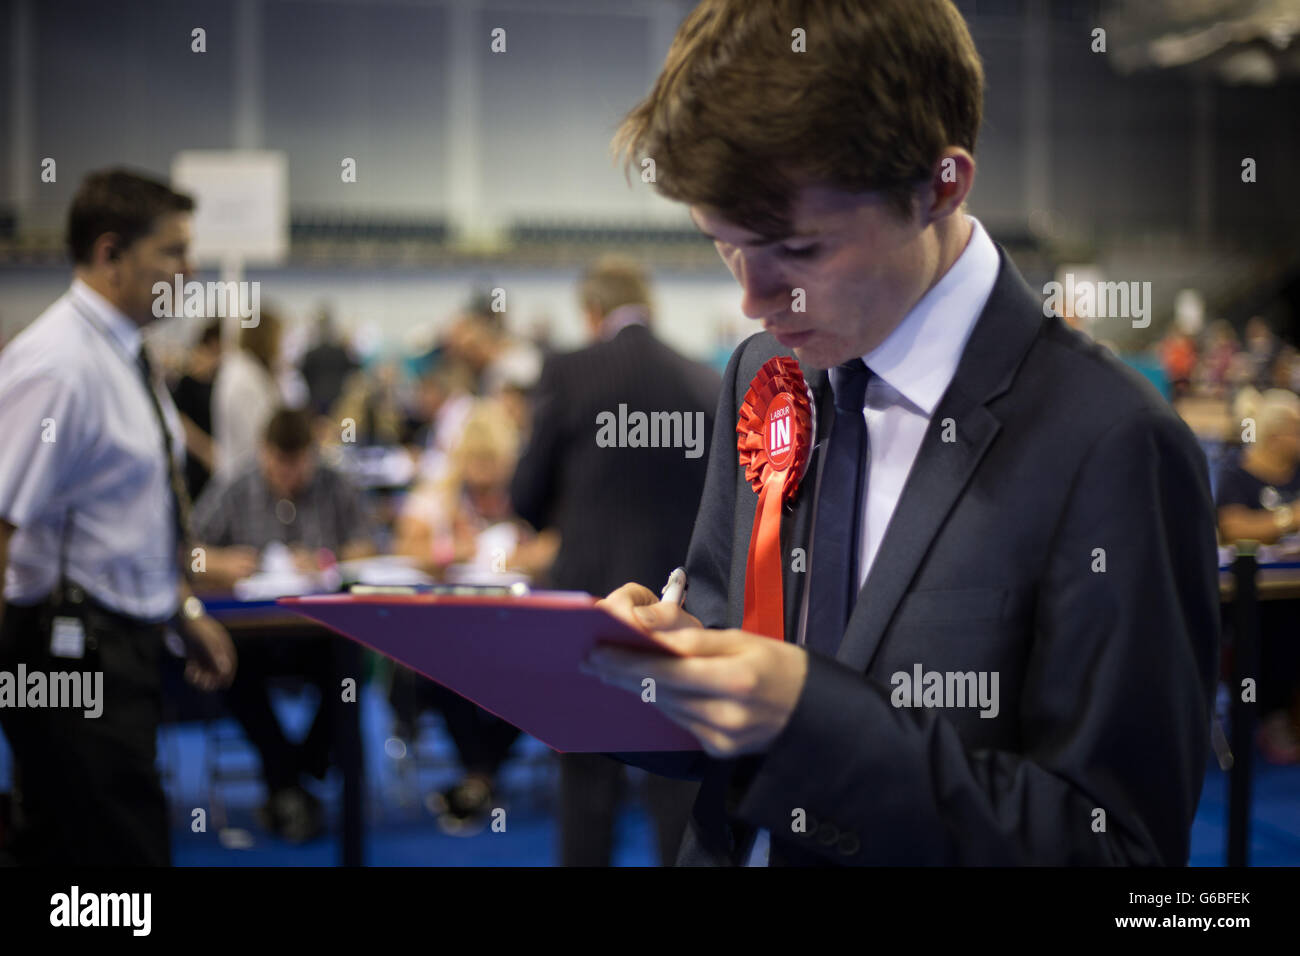 Glasgow, UK. 23rd June, 2016. The ballot boxes containing the votes arrive in the Emirates Arena to begin the count of votes, as voting takes place on the United Kingdom's referendum on European Union membership, in Glasgow, Scotland, on 23 June 2016. Credit:  jeremy sutton-hibbert/Alamy Live News Stock Photo